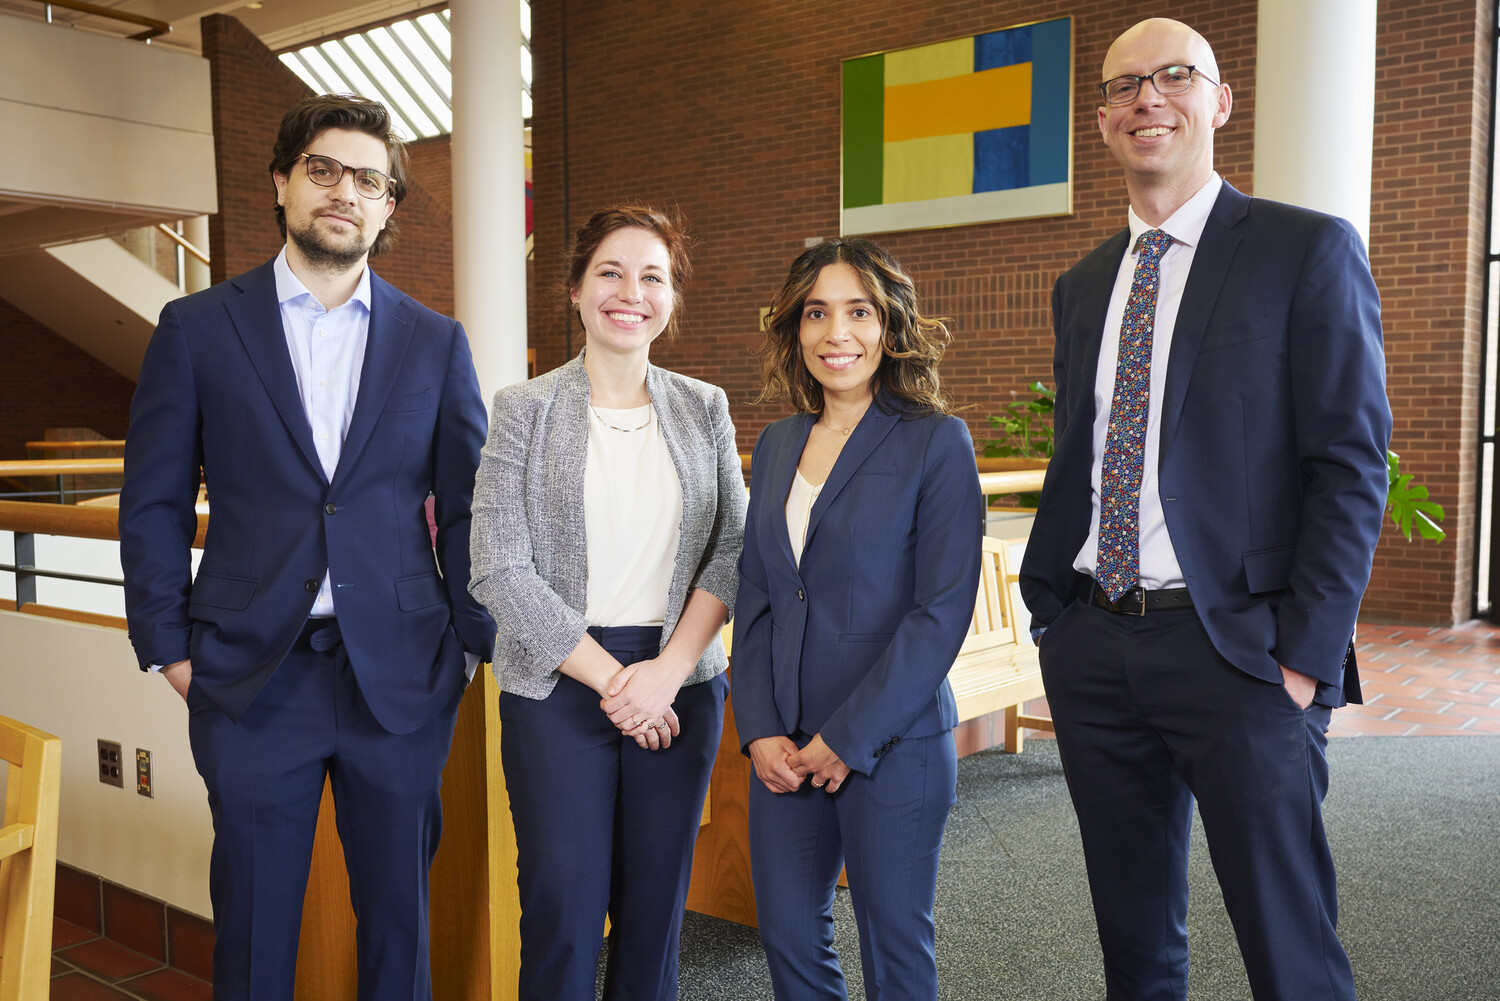 Minnesota Law Students Help Client Avoid Removal from U.S. with Second 6th Circuit Appellate Win